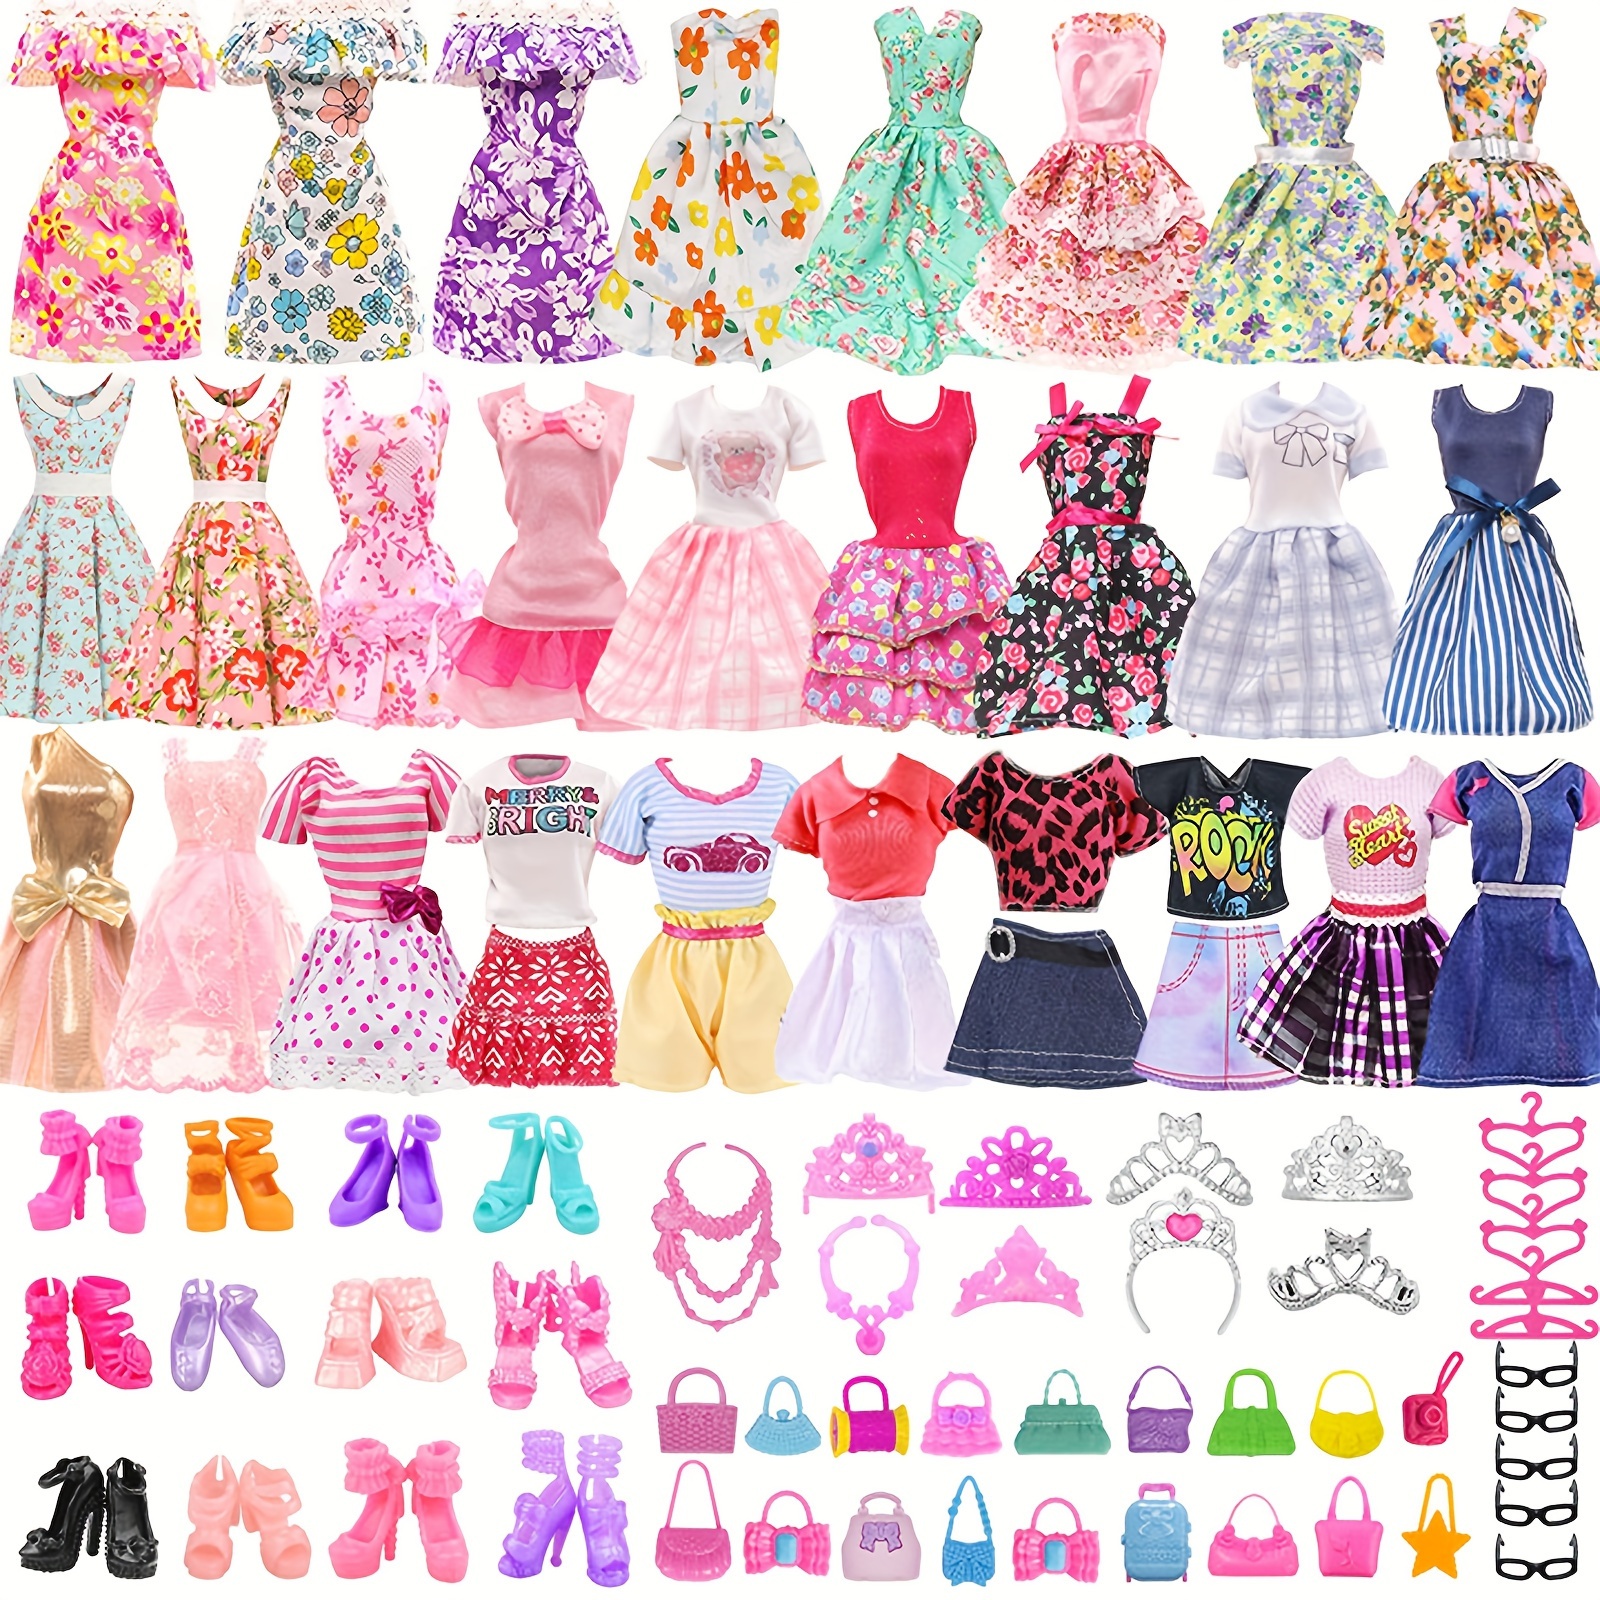 11.5 Inch Doll Clothes & Accessories 4 Tops 4 Pants/Skirts Outfits 2 Coats  2 Fashion Dresses 10 Shoes 2 Glasses 11 Handbags for 11.5 Inch Dolls